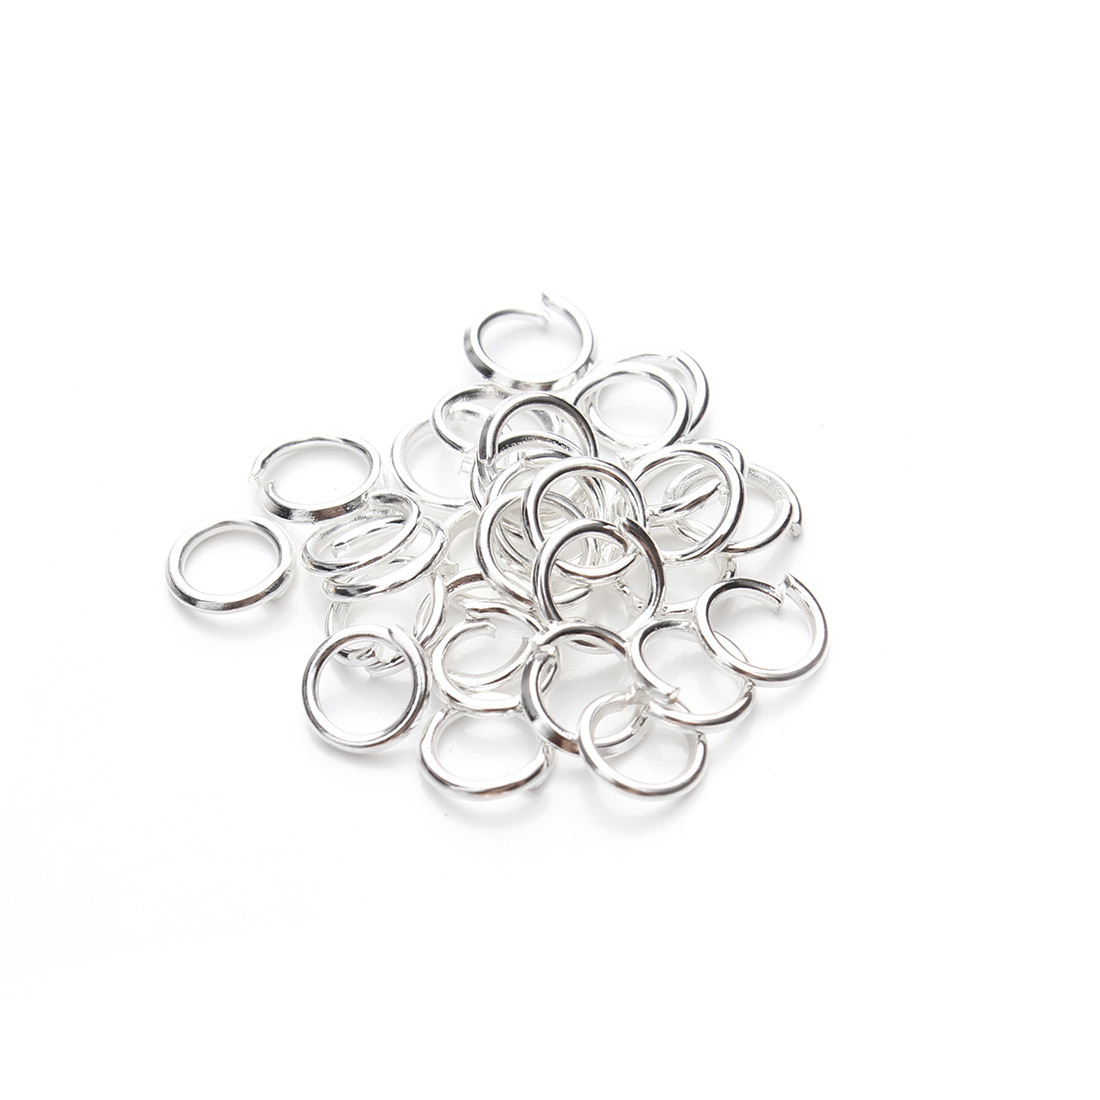 Silver outer diameter 20mm